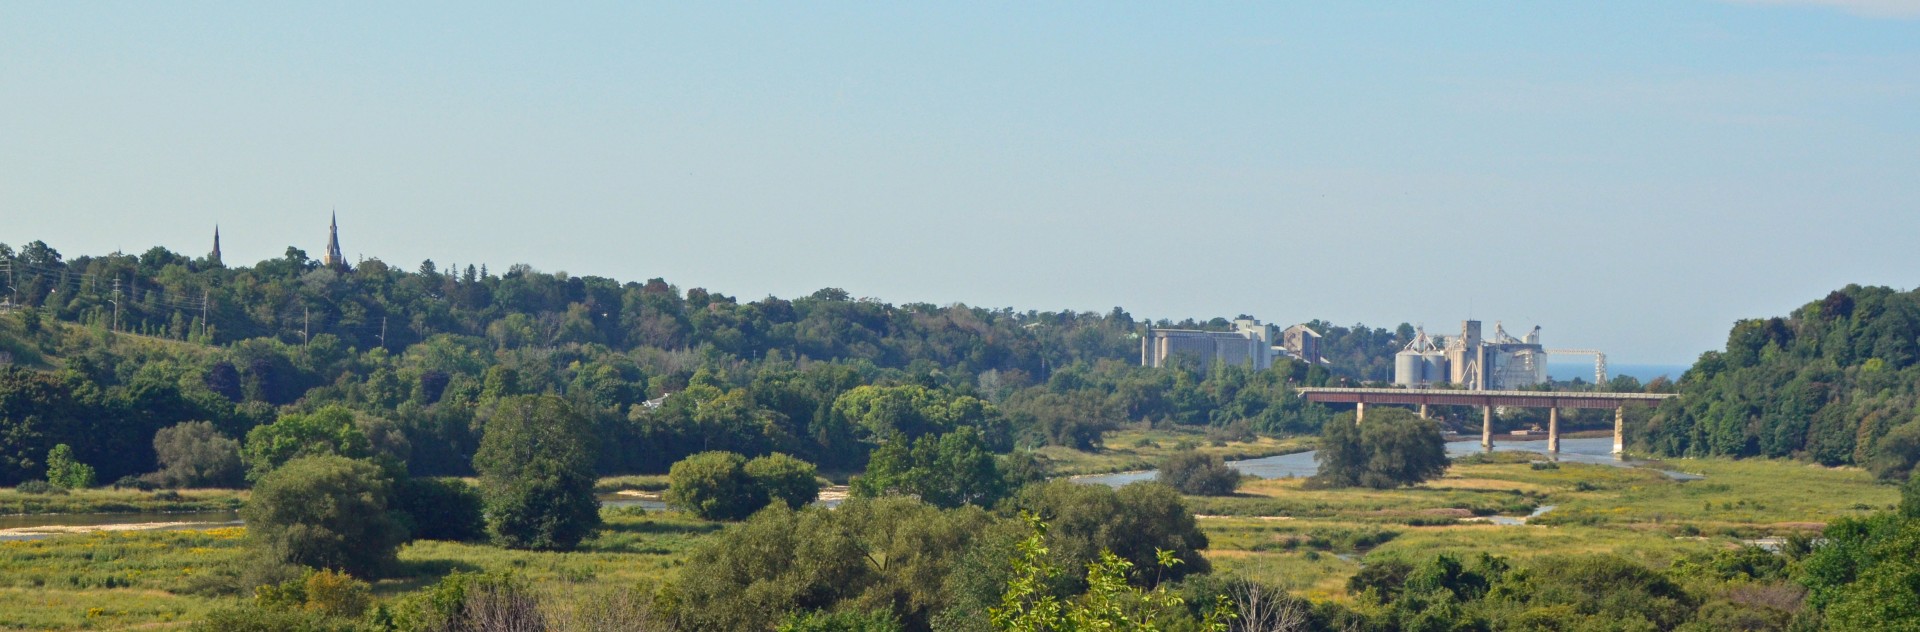 View of Goderich from below Dunlop Hill, Lake Huron area